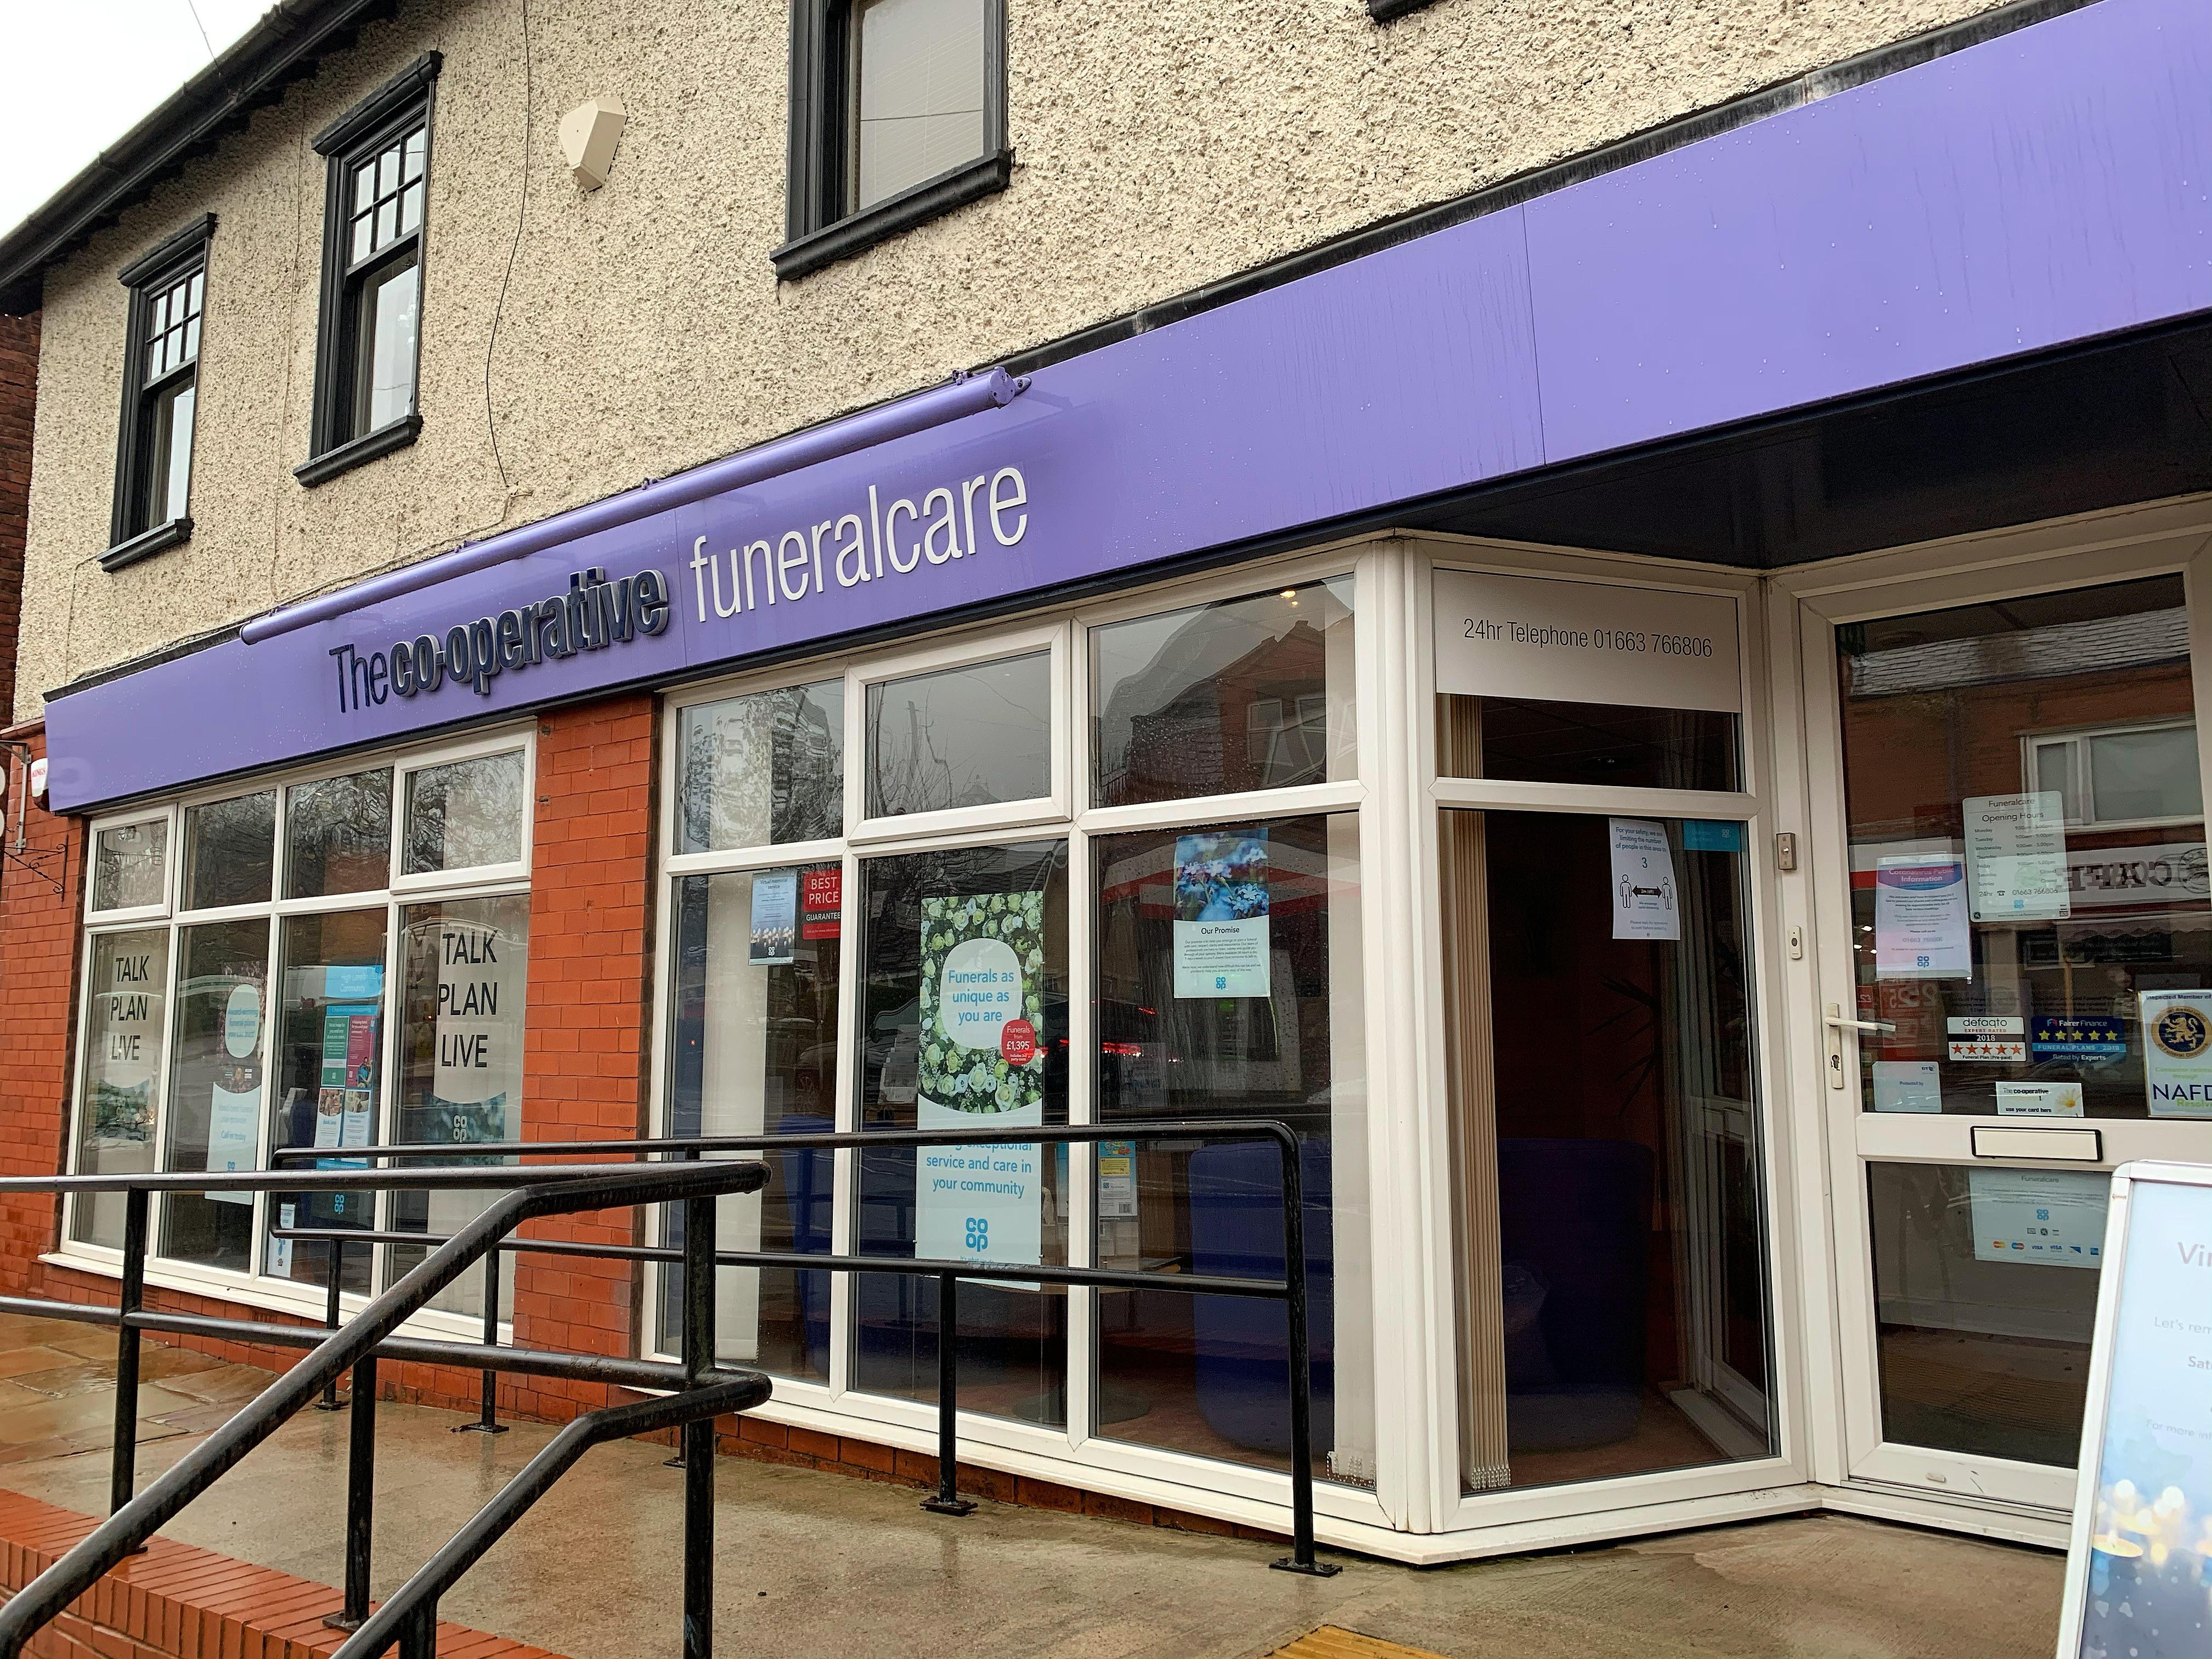 Images Co-op Funeralcare, High Lane